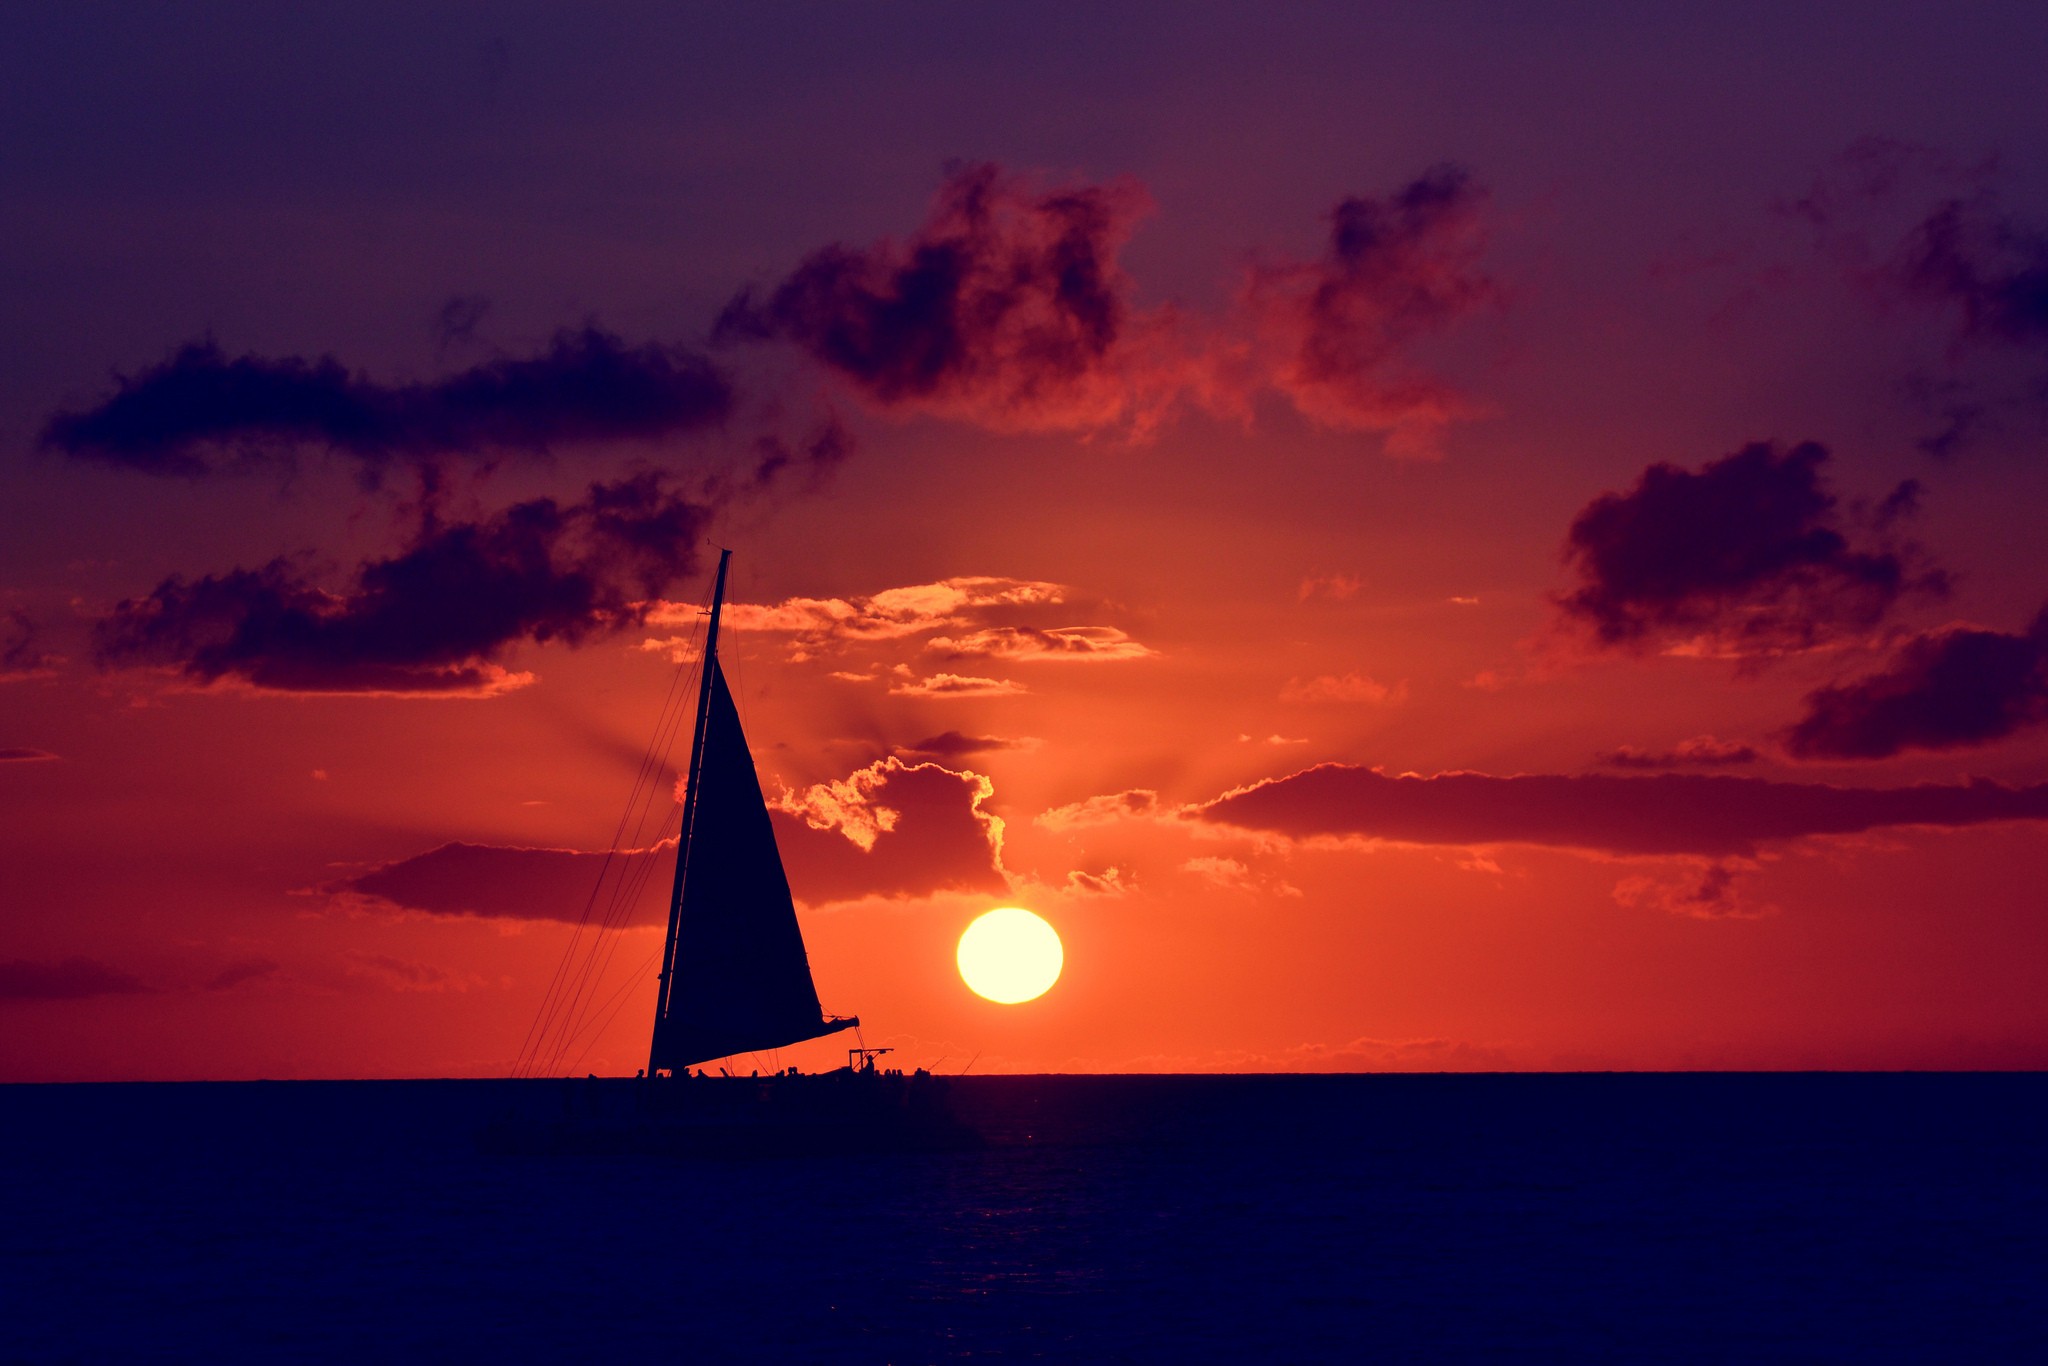 red, sailboat, vehicles, sailing ship, cloud, colors, ocean, sailing, sky, sun, sunset wallpapers for tablet